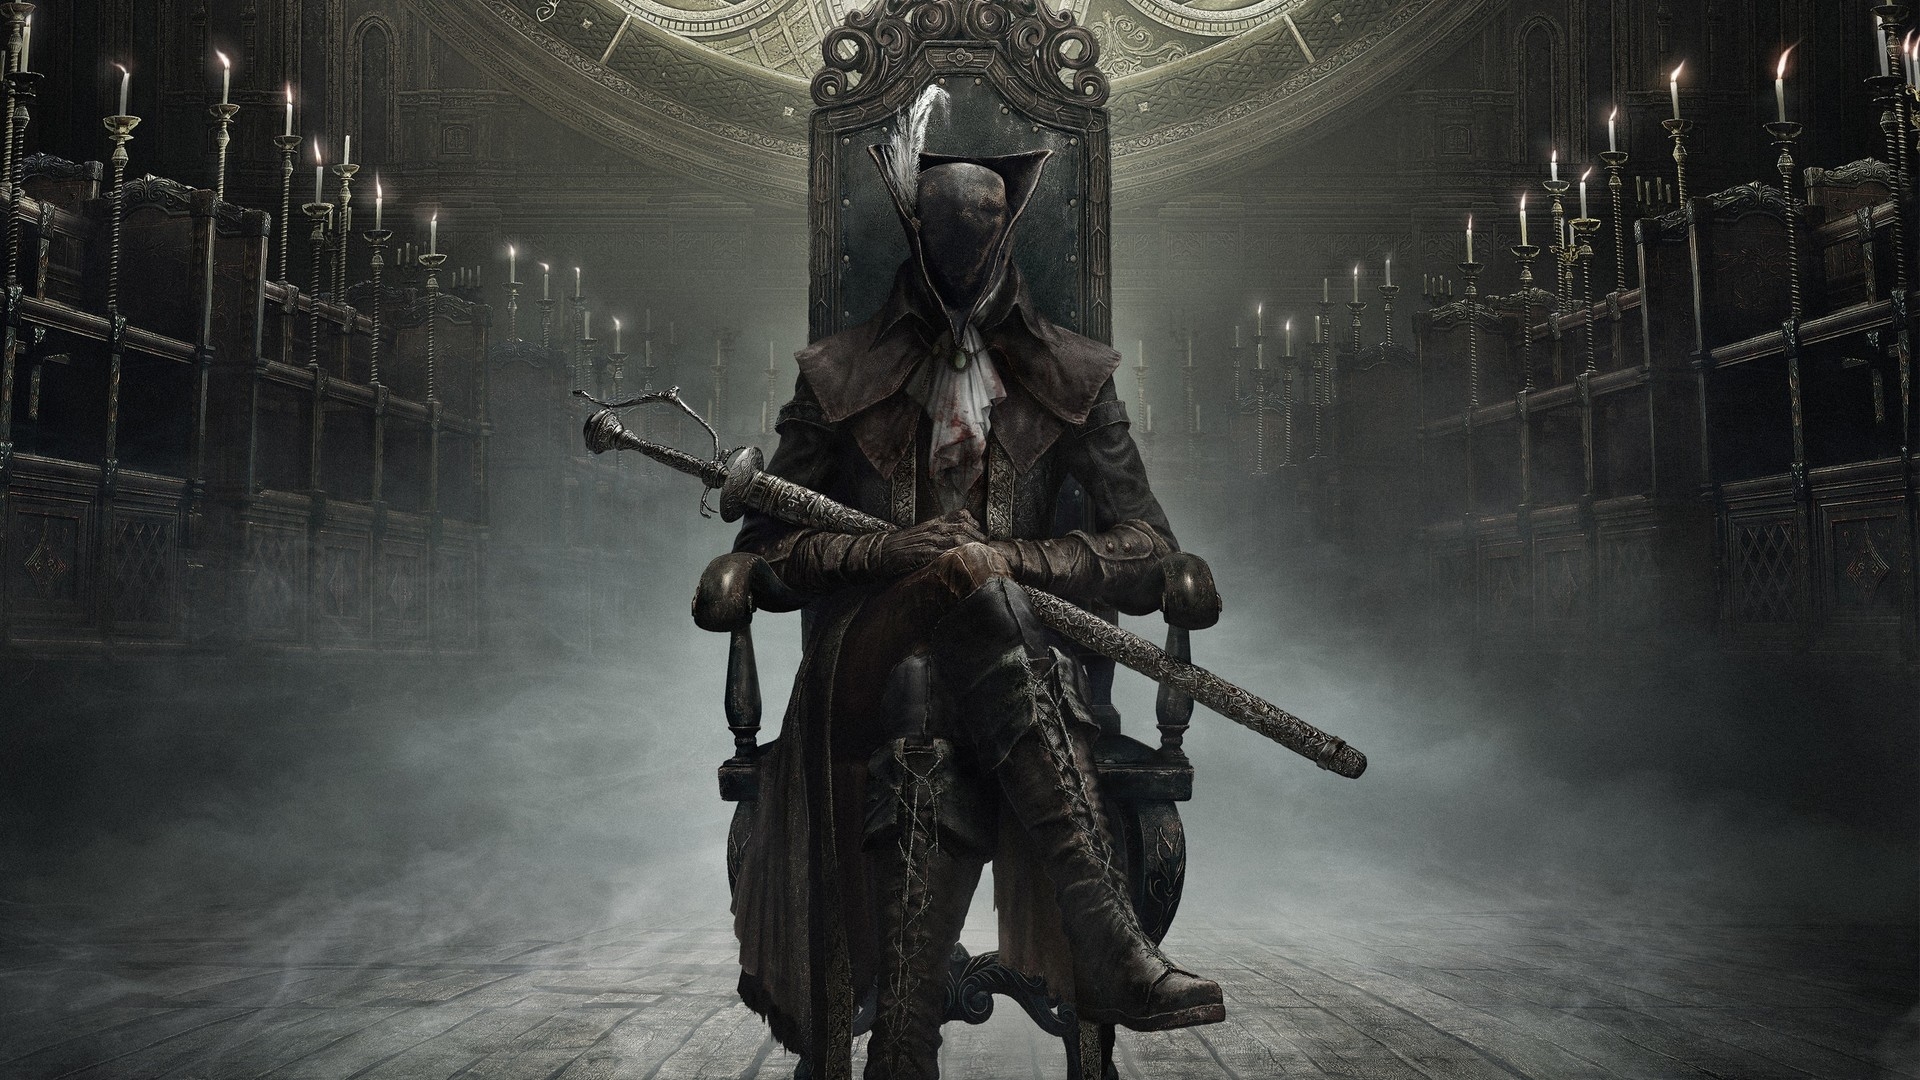 Today, we are going to be going over is a Bloodborne PC remake on its way, as there have been many rumors in the past years but no official announcement.